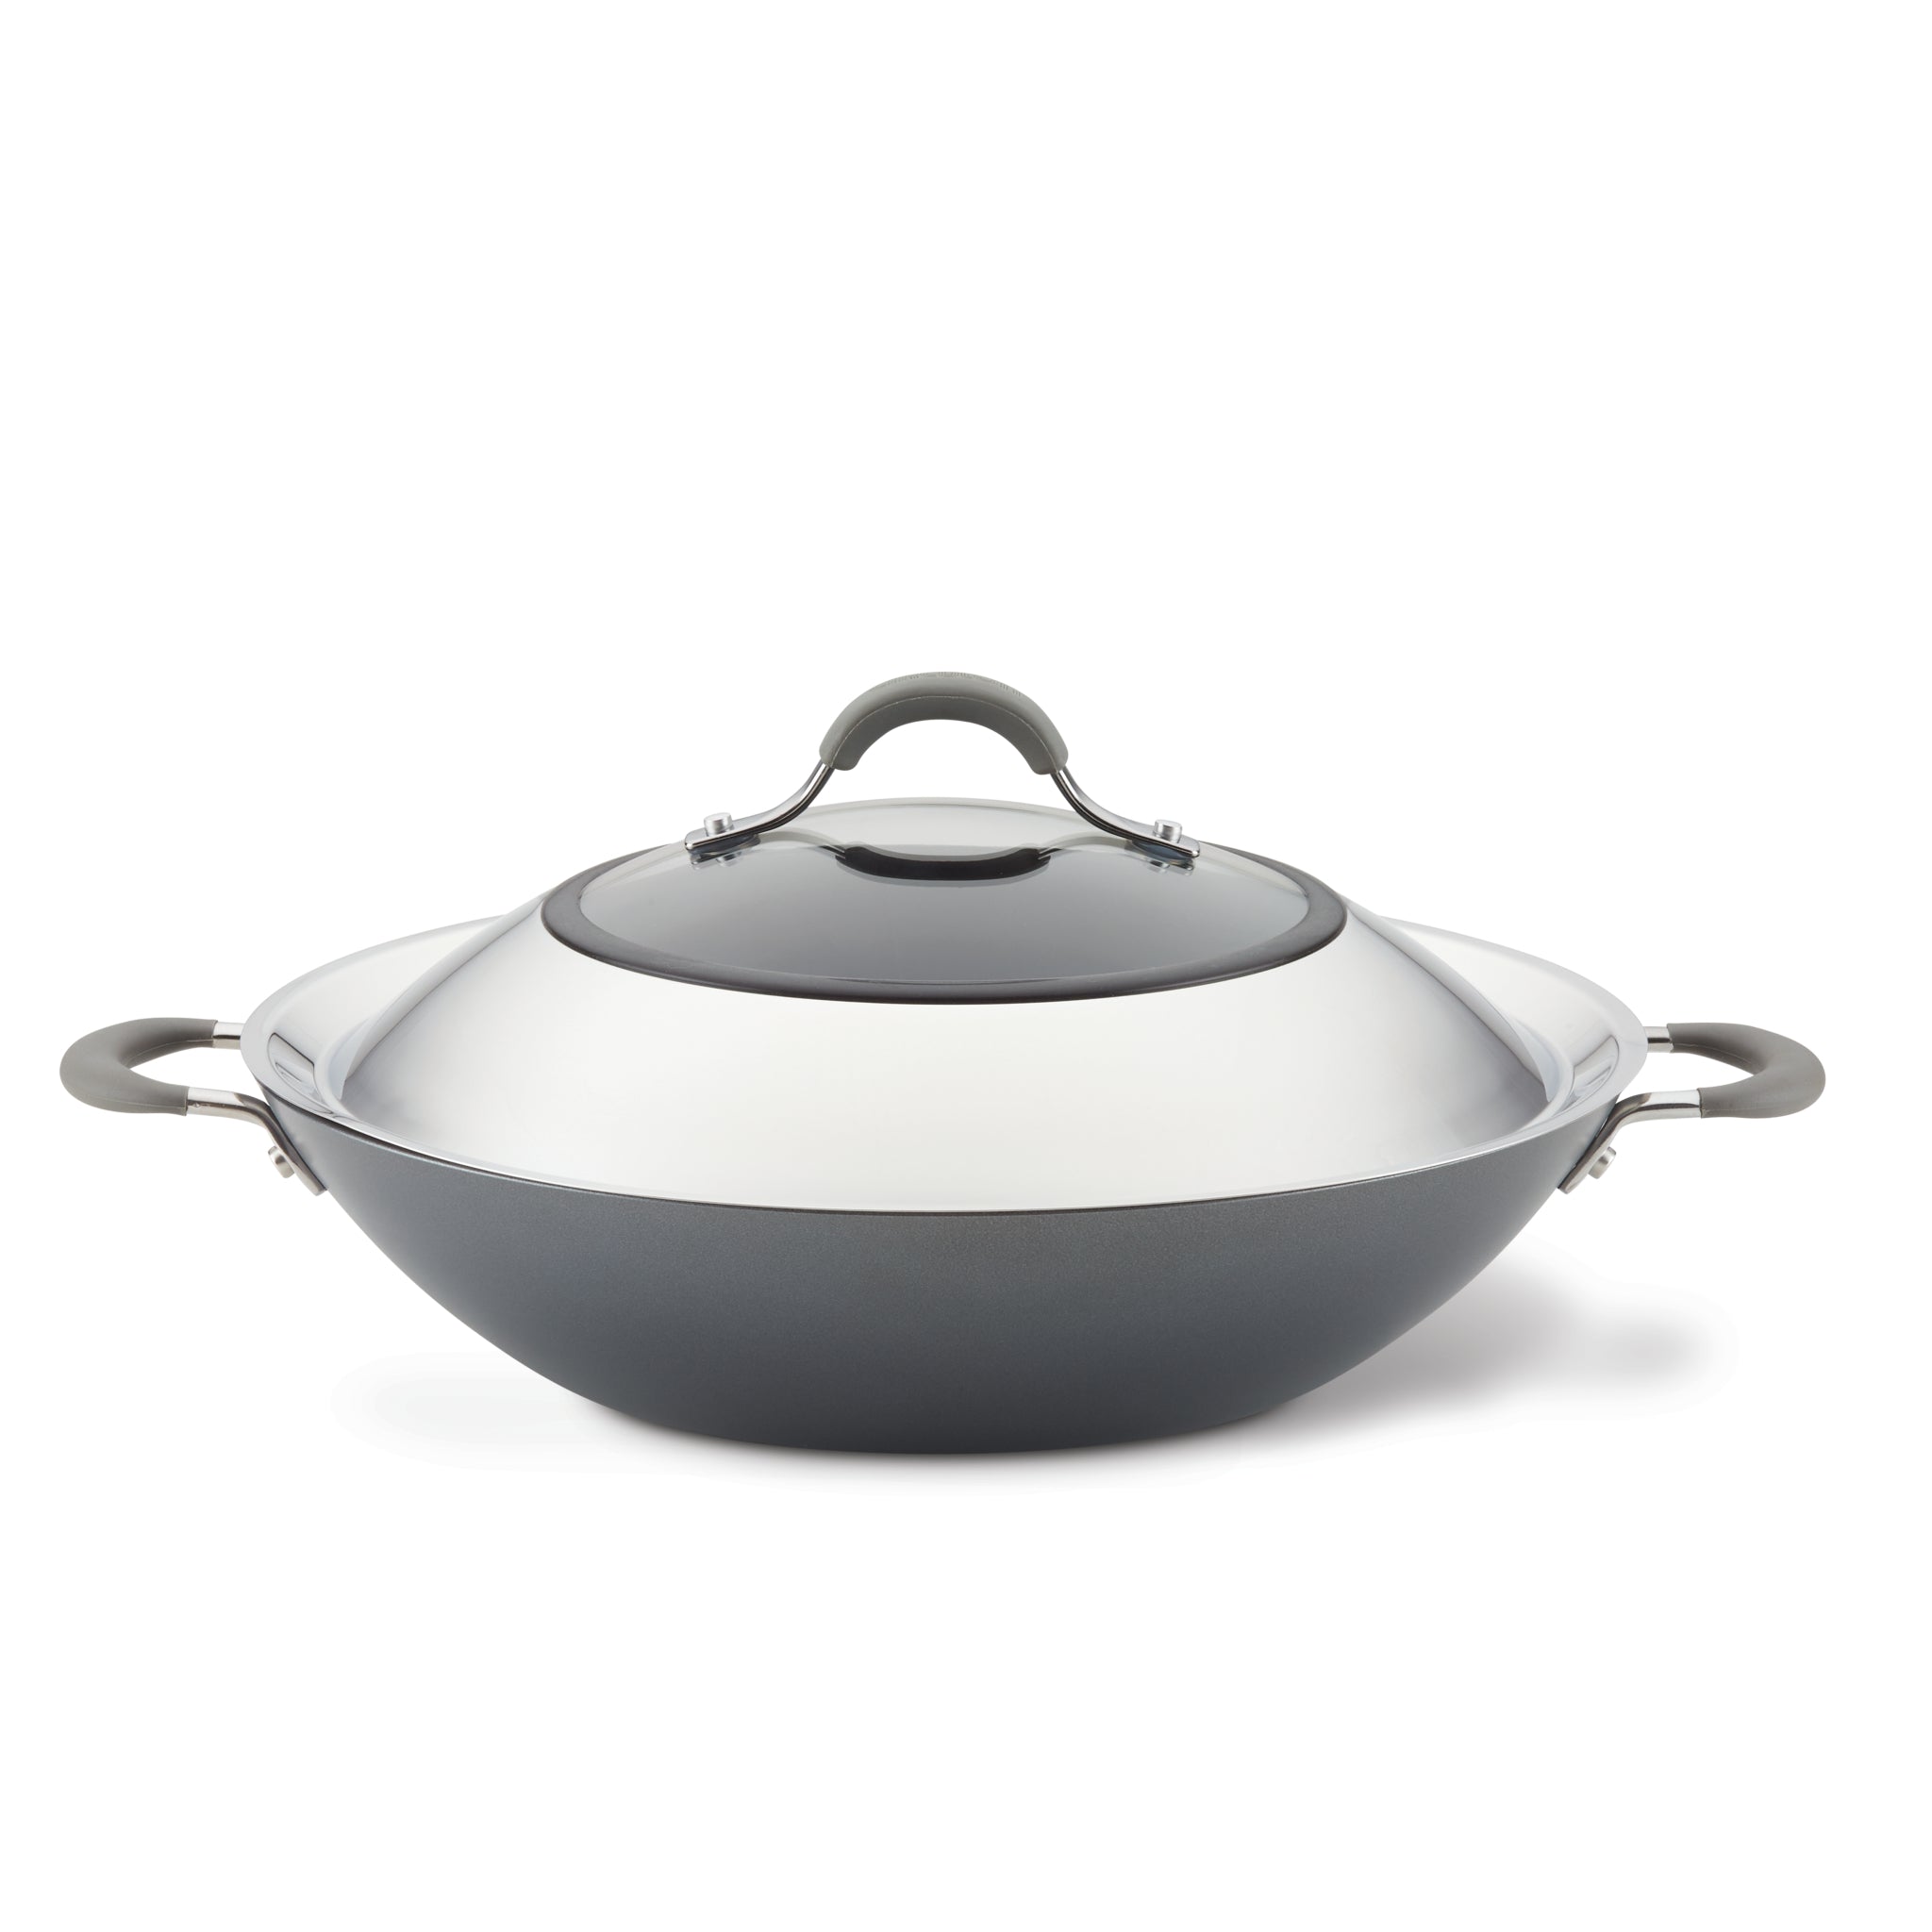 Circulon Cookware 14 Covered wok w/ Clear Lid